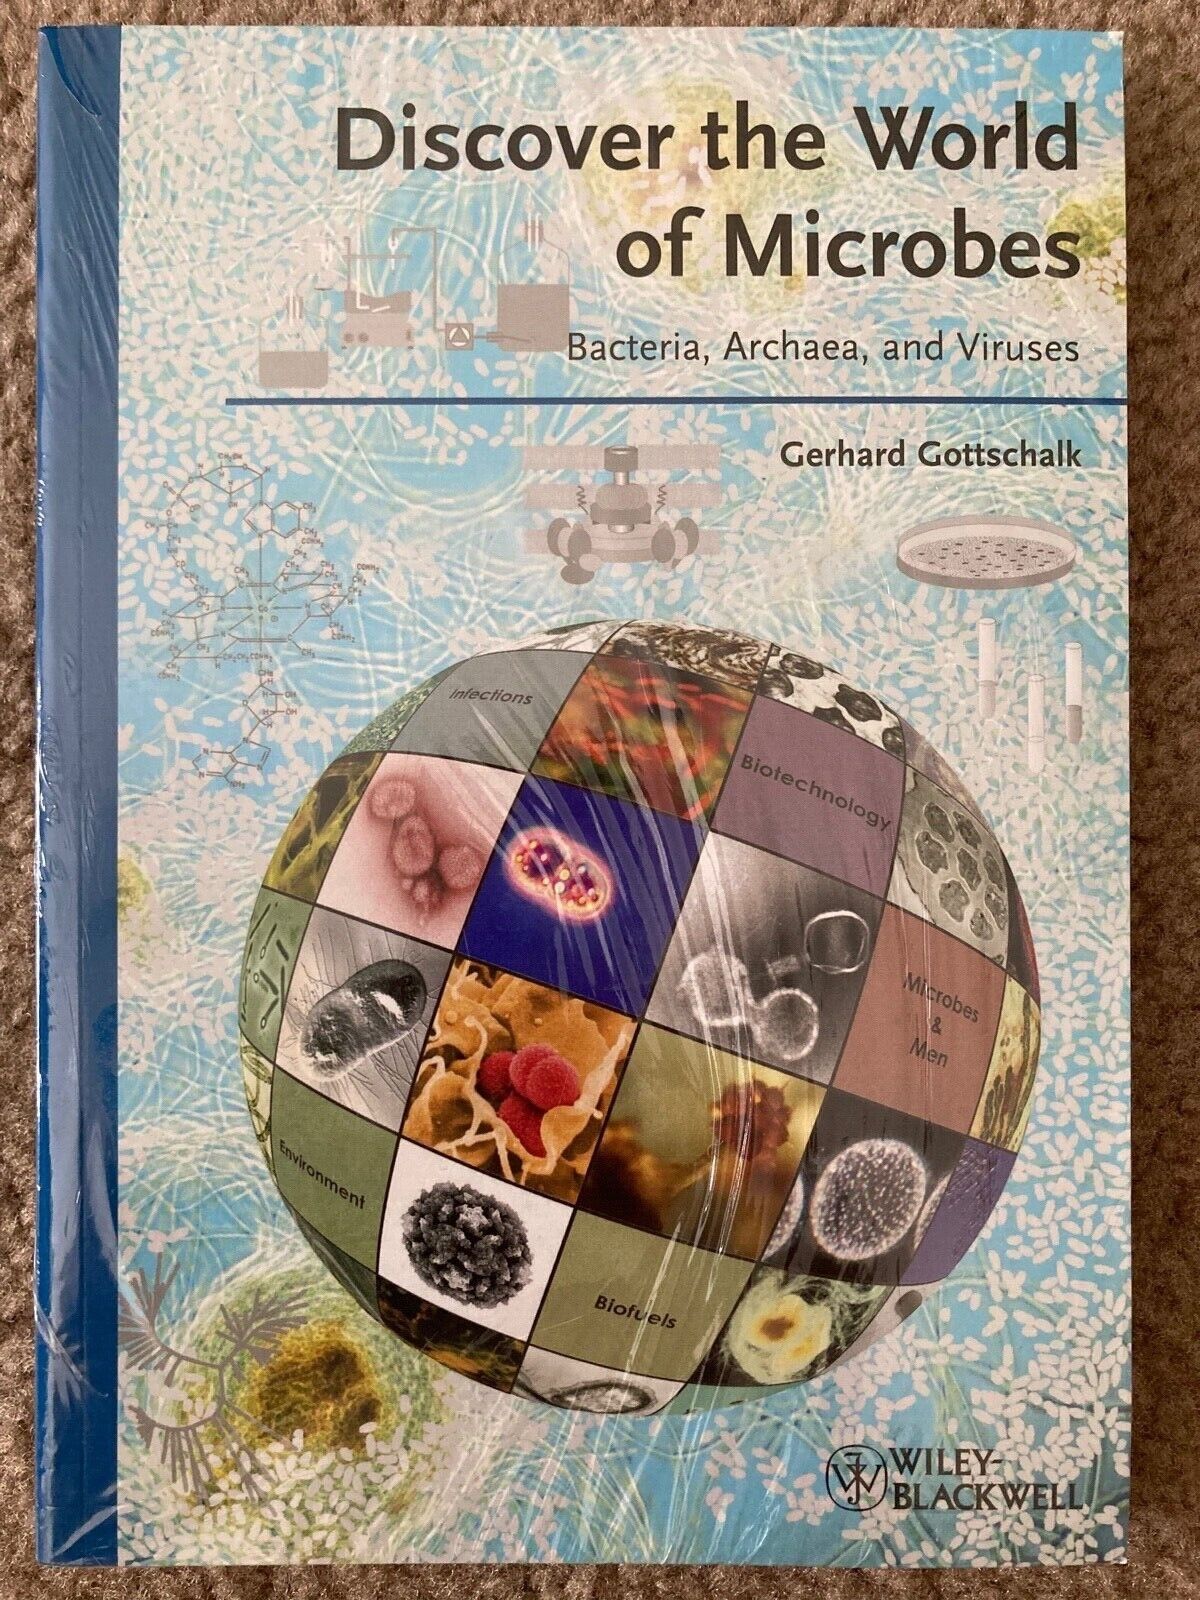 Discover the World of Microbes : Bacteria, Archaea, Viruses by Gerhard Gottschal